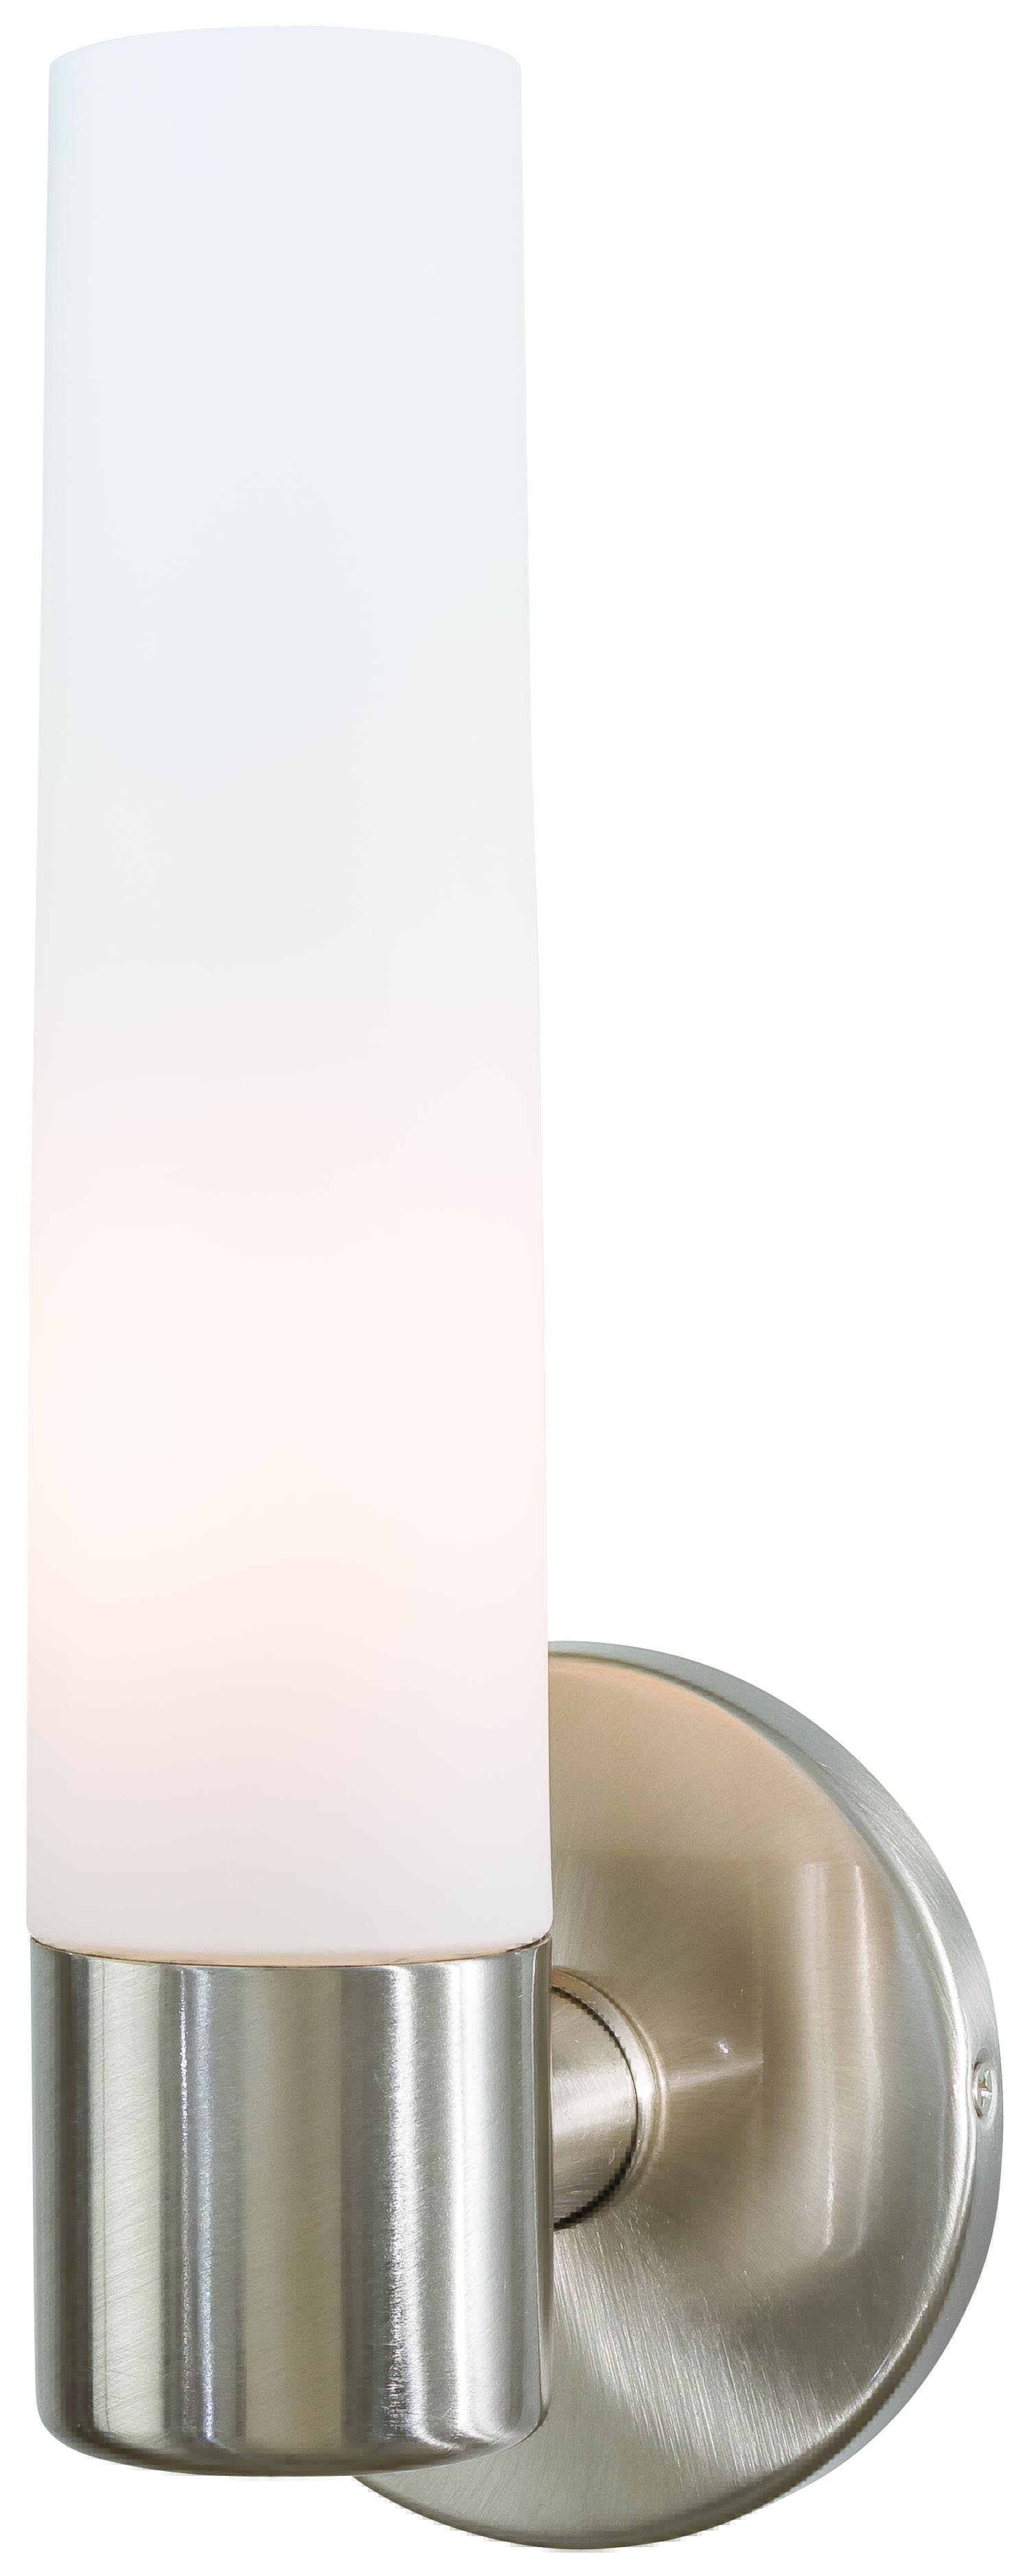 George Kovacs Saber Light Wall Sconce in Brushed Nickel, P5041-084 The  Light Brothers